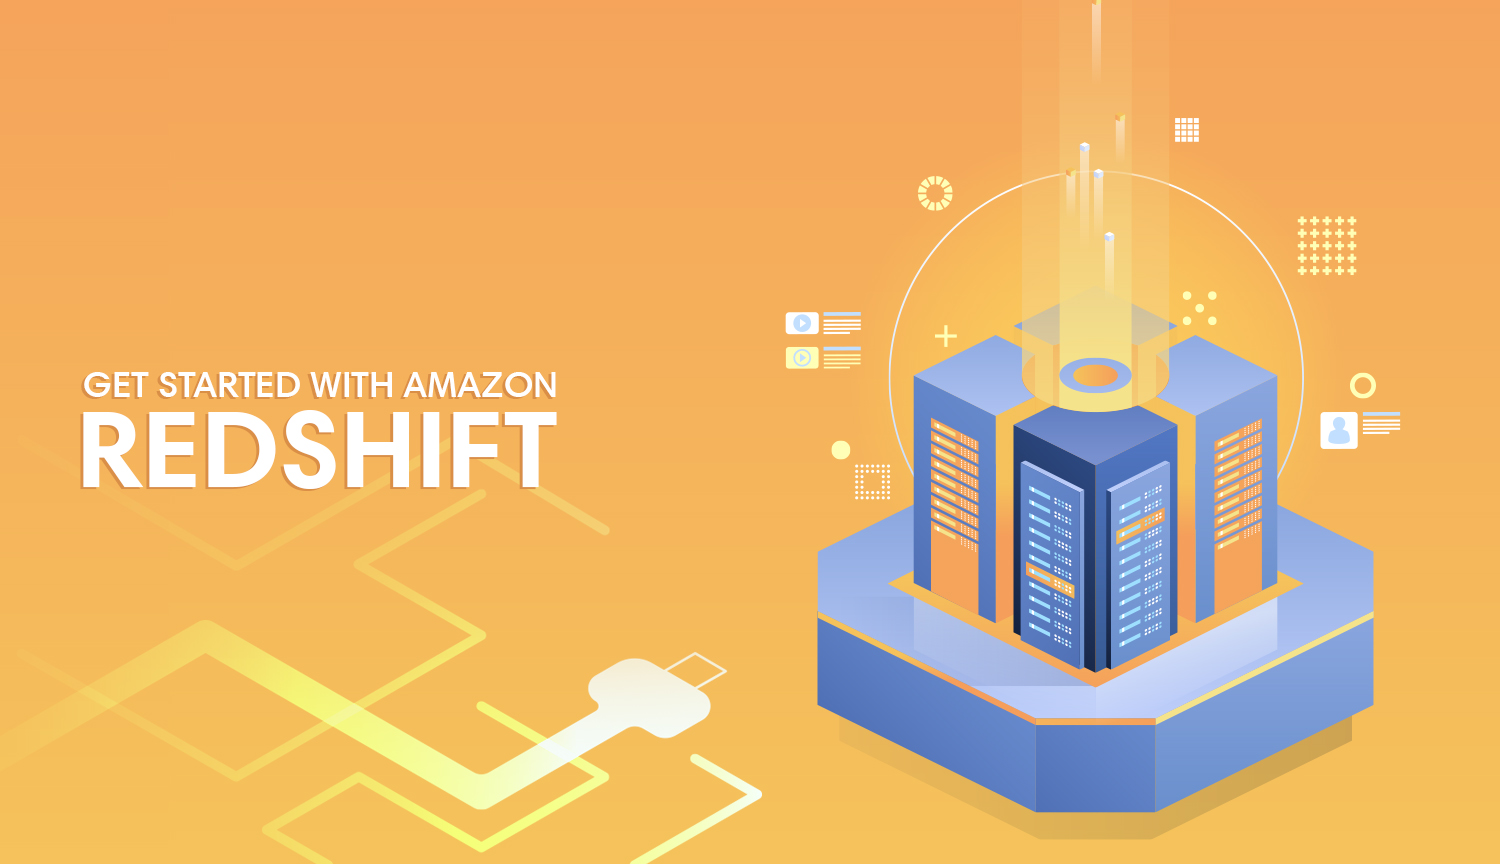 Using Amazon Redshift as your Data Warehouse